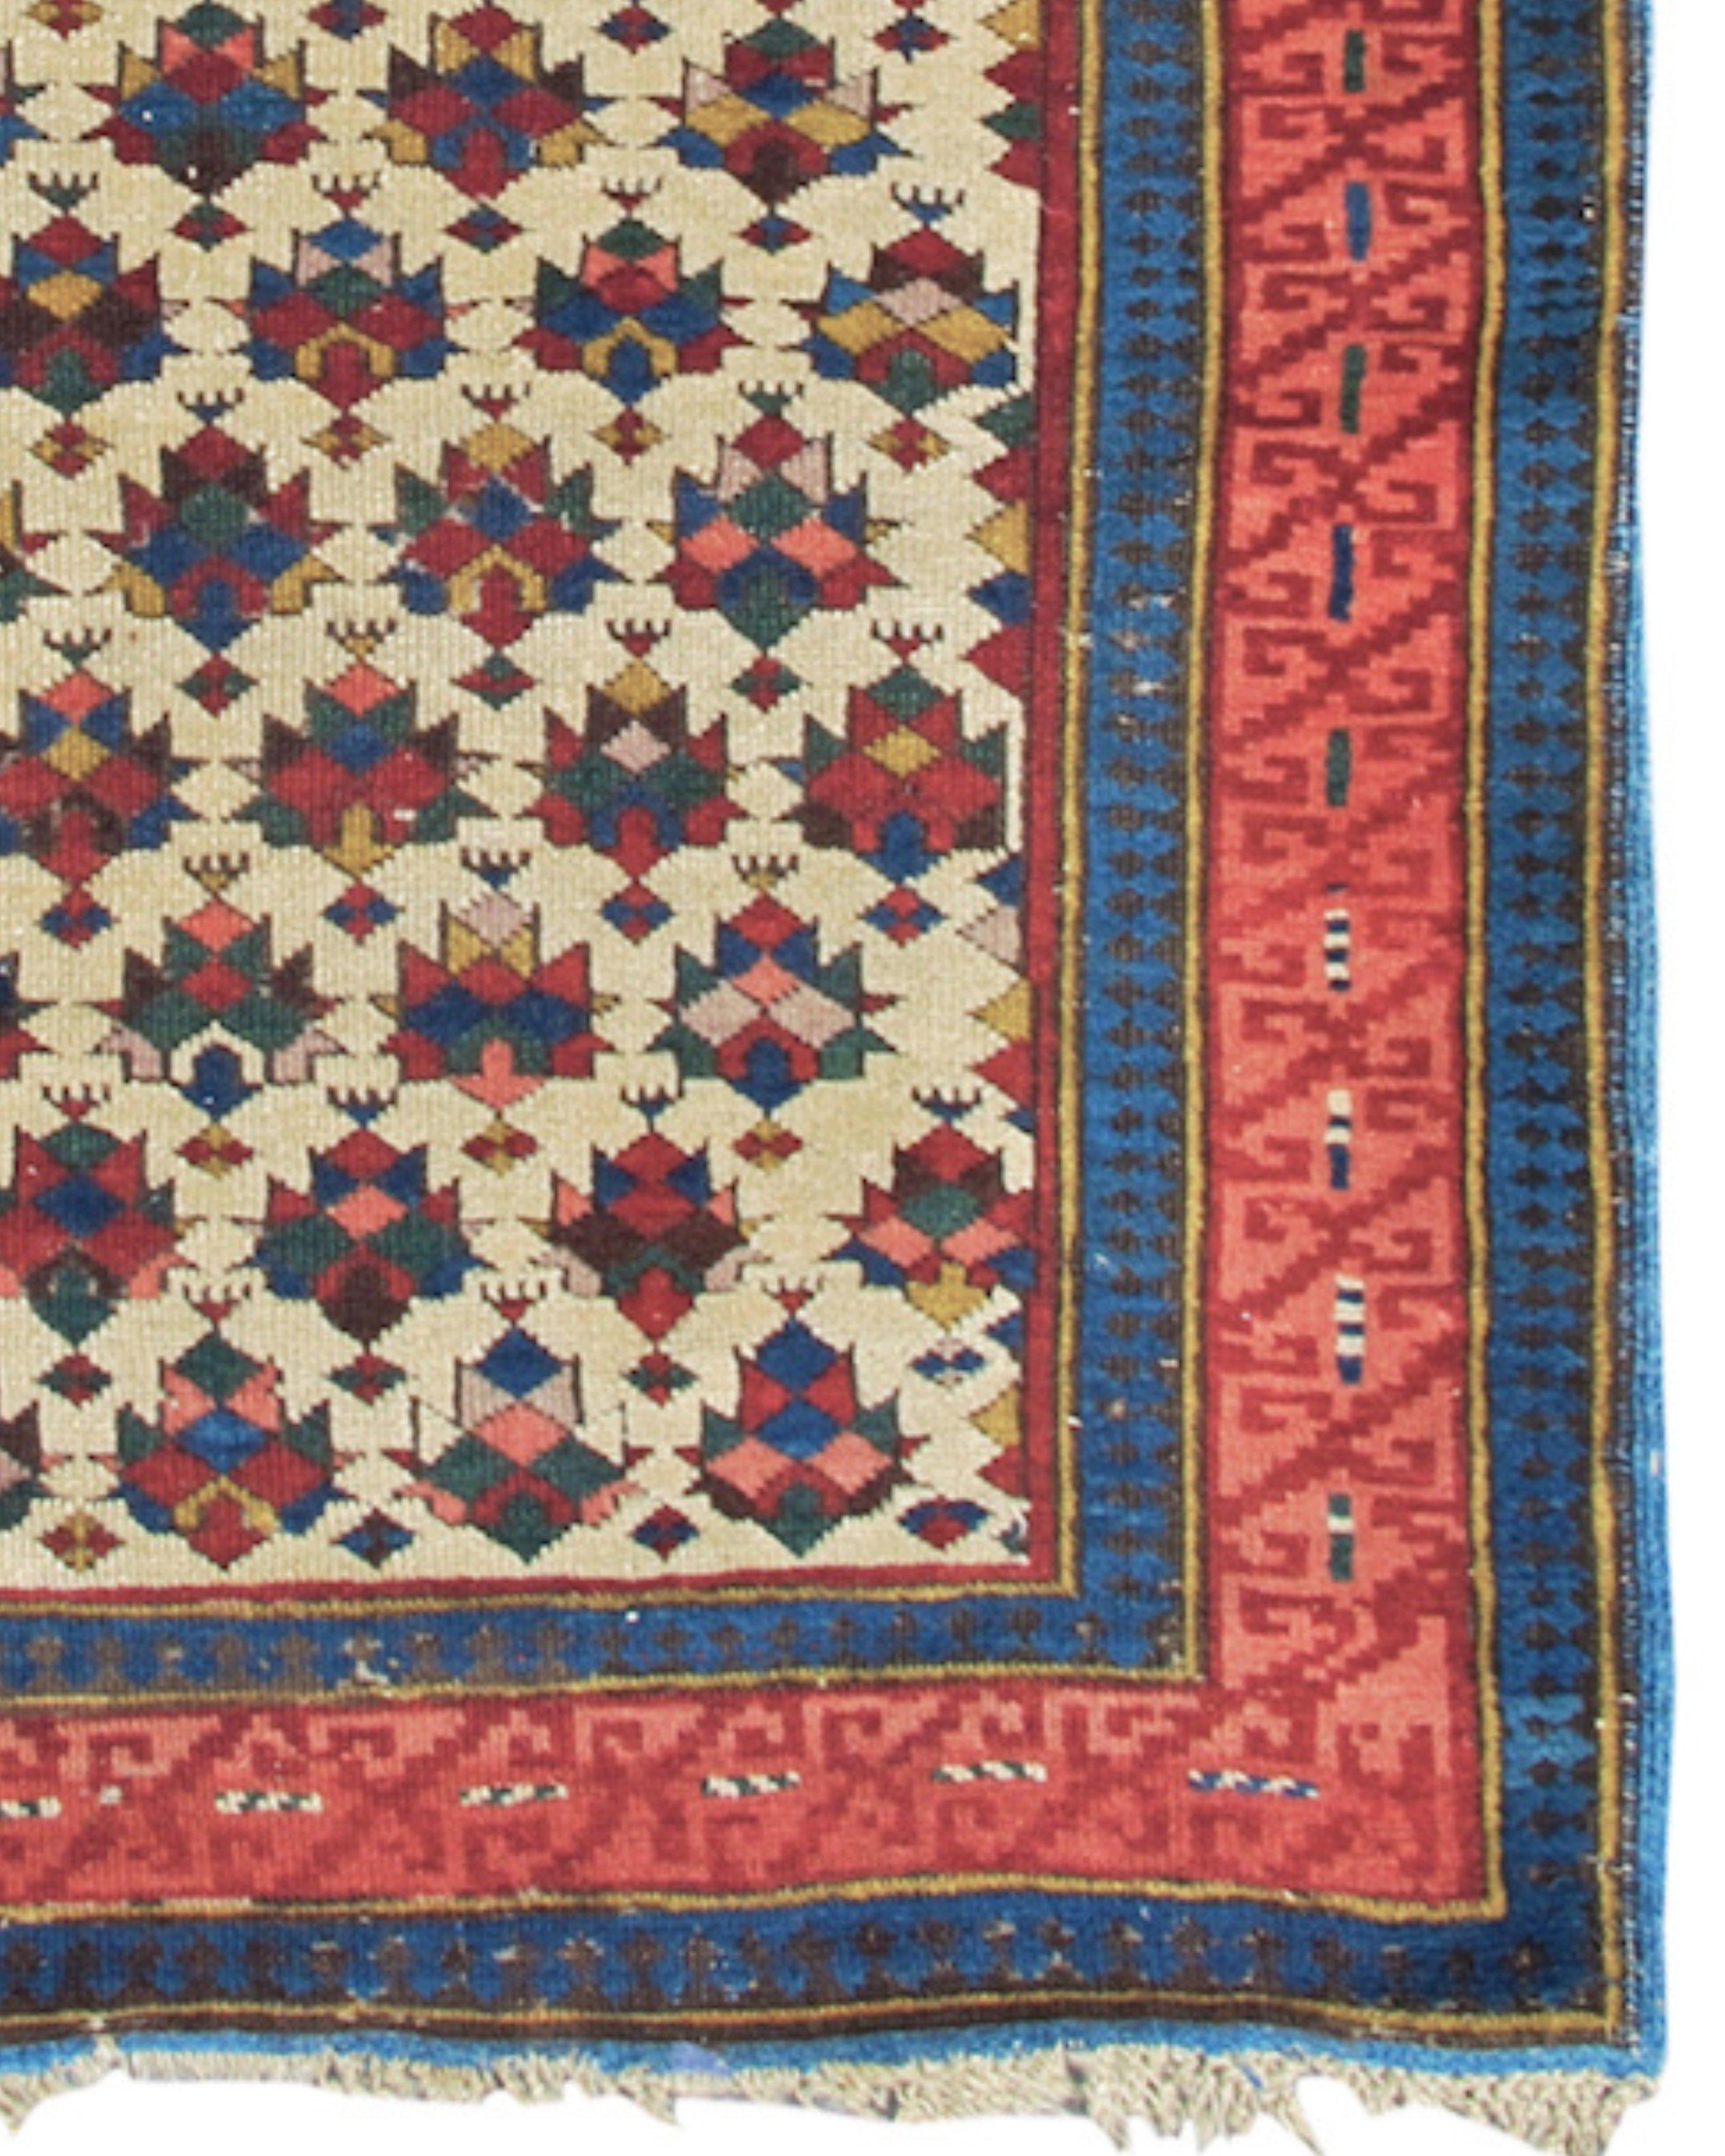 Kuba Rug, 3rd Quarter 19th Century

Stylized almost crystalline shrubs painted in a rainbow of colors are drawn against the crisp ivory background of this Kuba rug from the Southeast Caucasus. Each motif is individuated with few if any sharing the